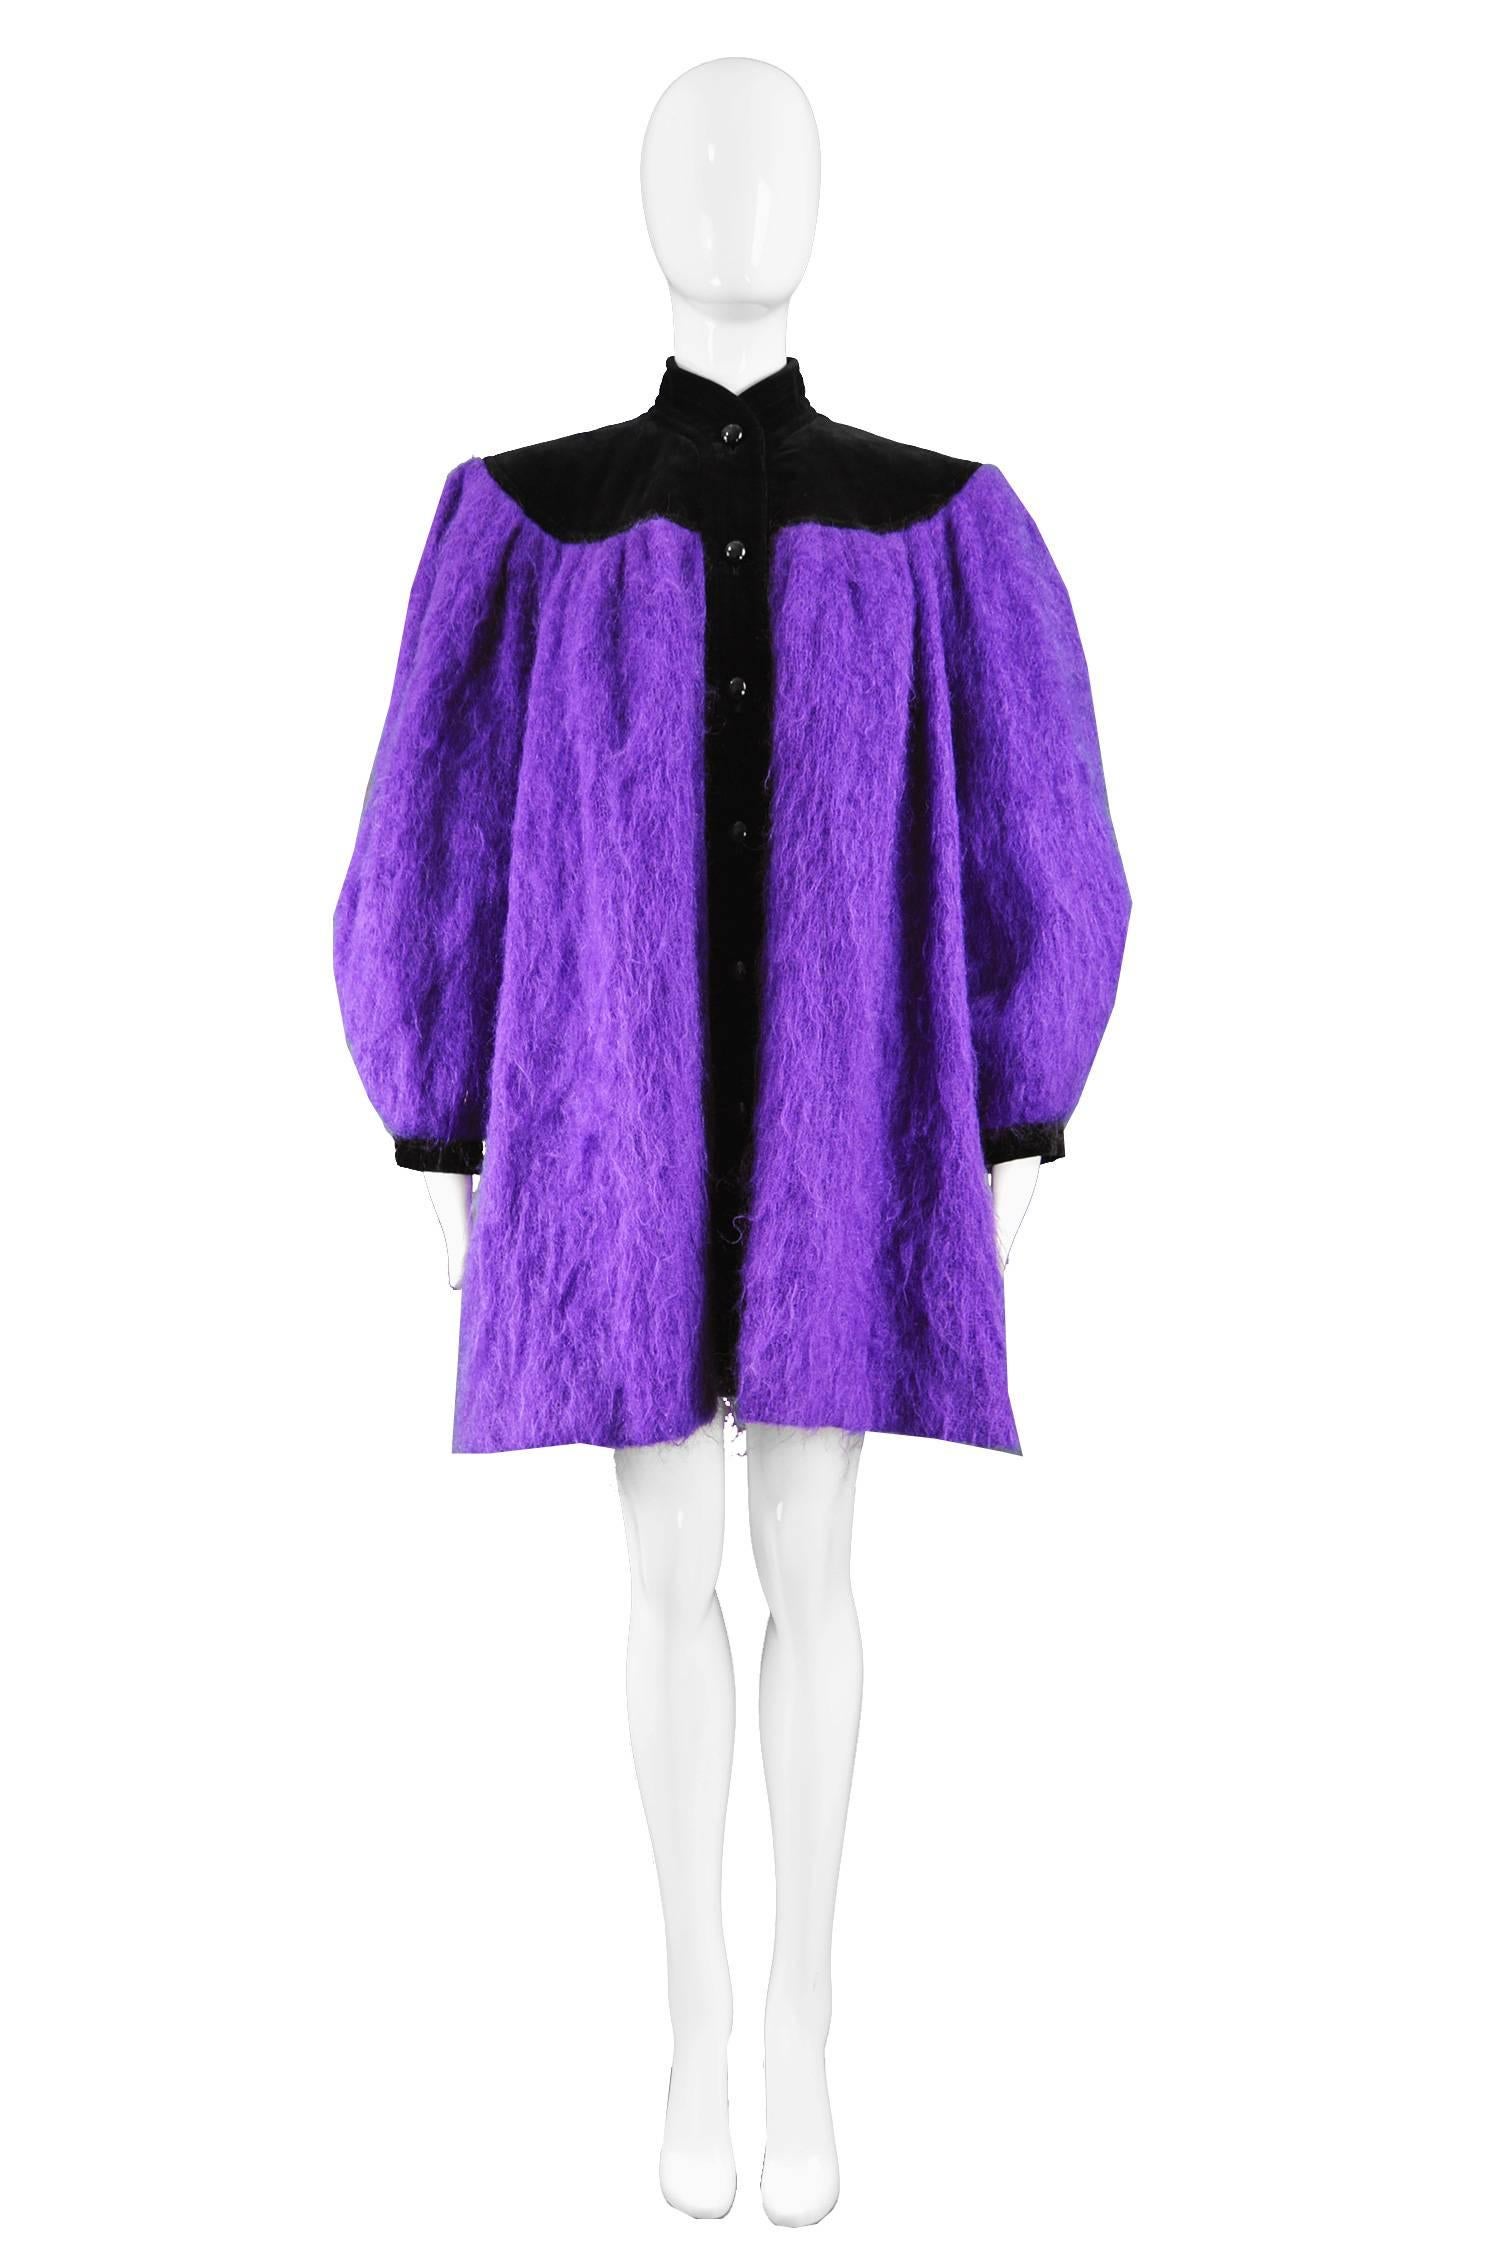 Yves Saint Laurent Purple Mohair & Black Velvet Vintage Coat, 1980s

Size: Marked FR 36 which is roughly a women's Small but due to the intentionally oversized fit it would suit a Small to Large. 
Bust - up to 48” / 122cm (has an oversized